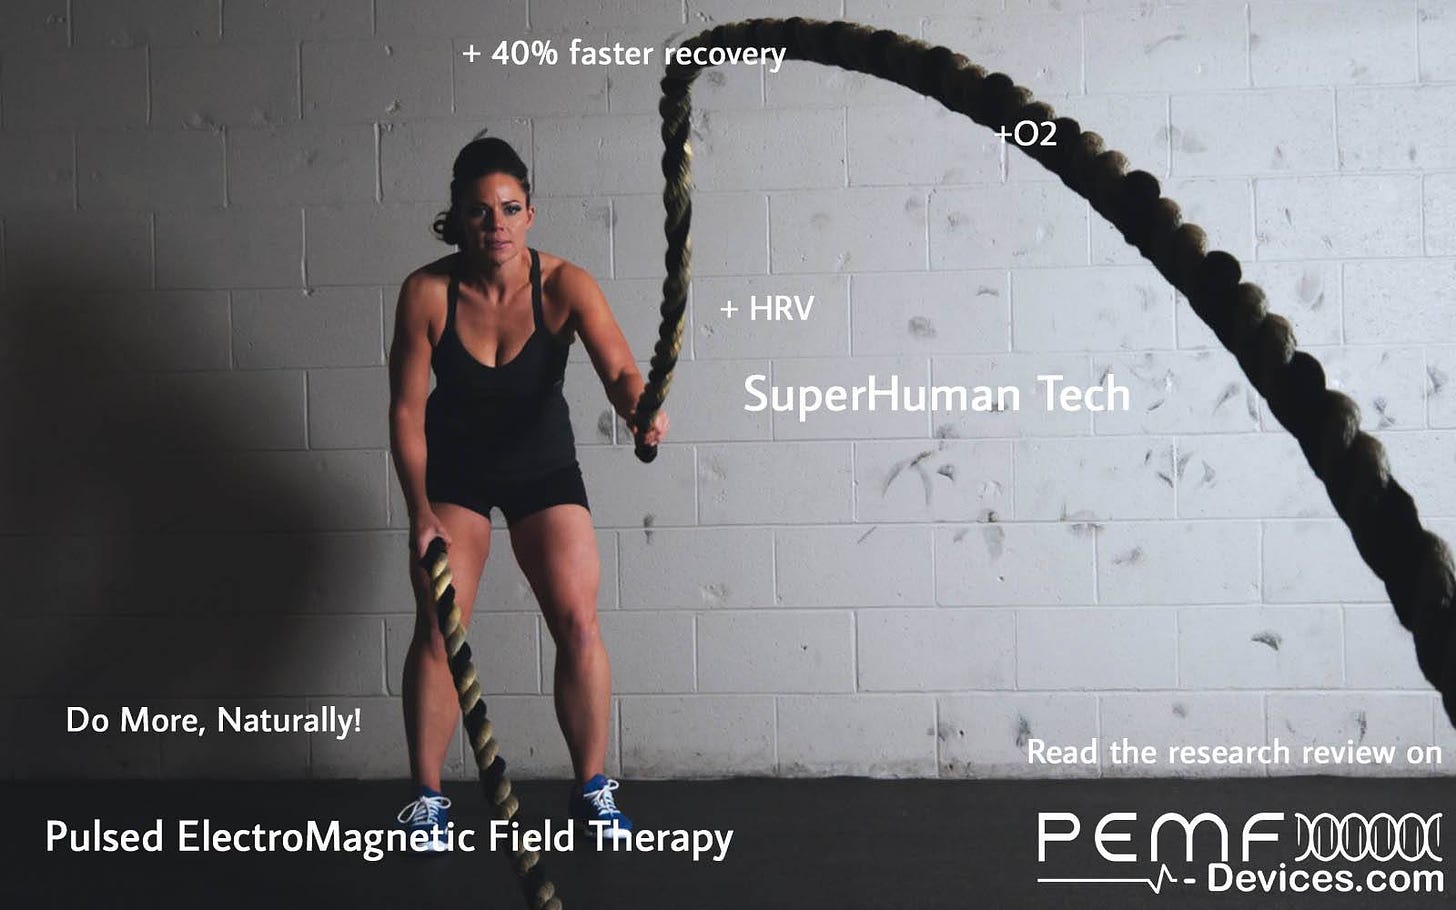 PEMF sports performance and physiotherapy research